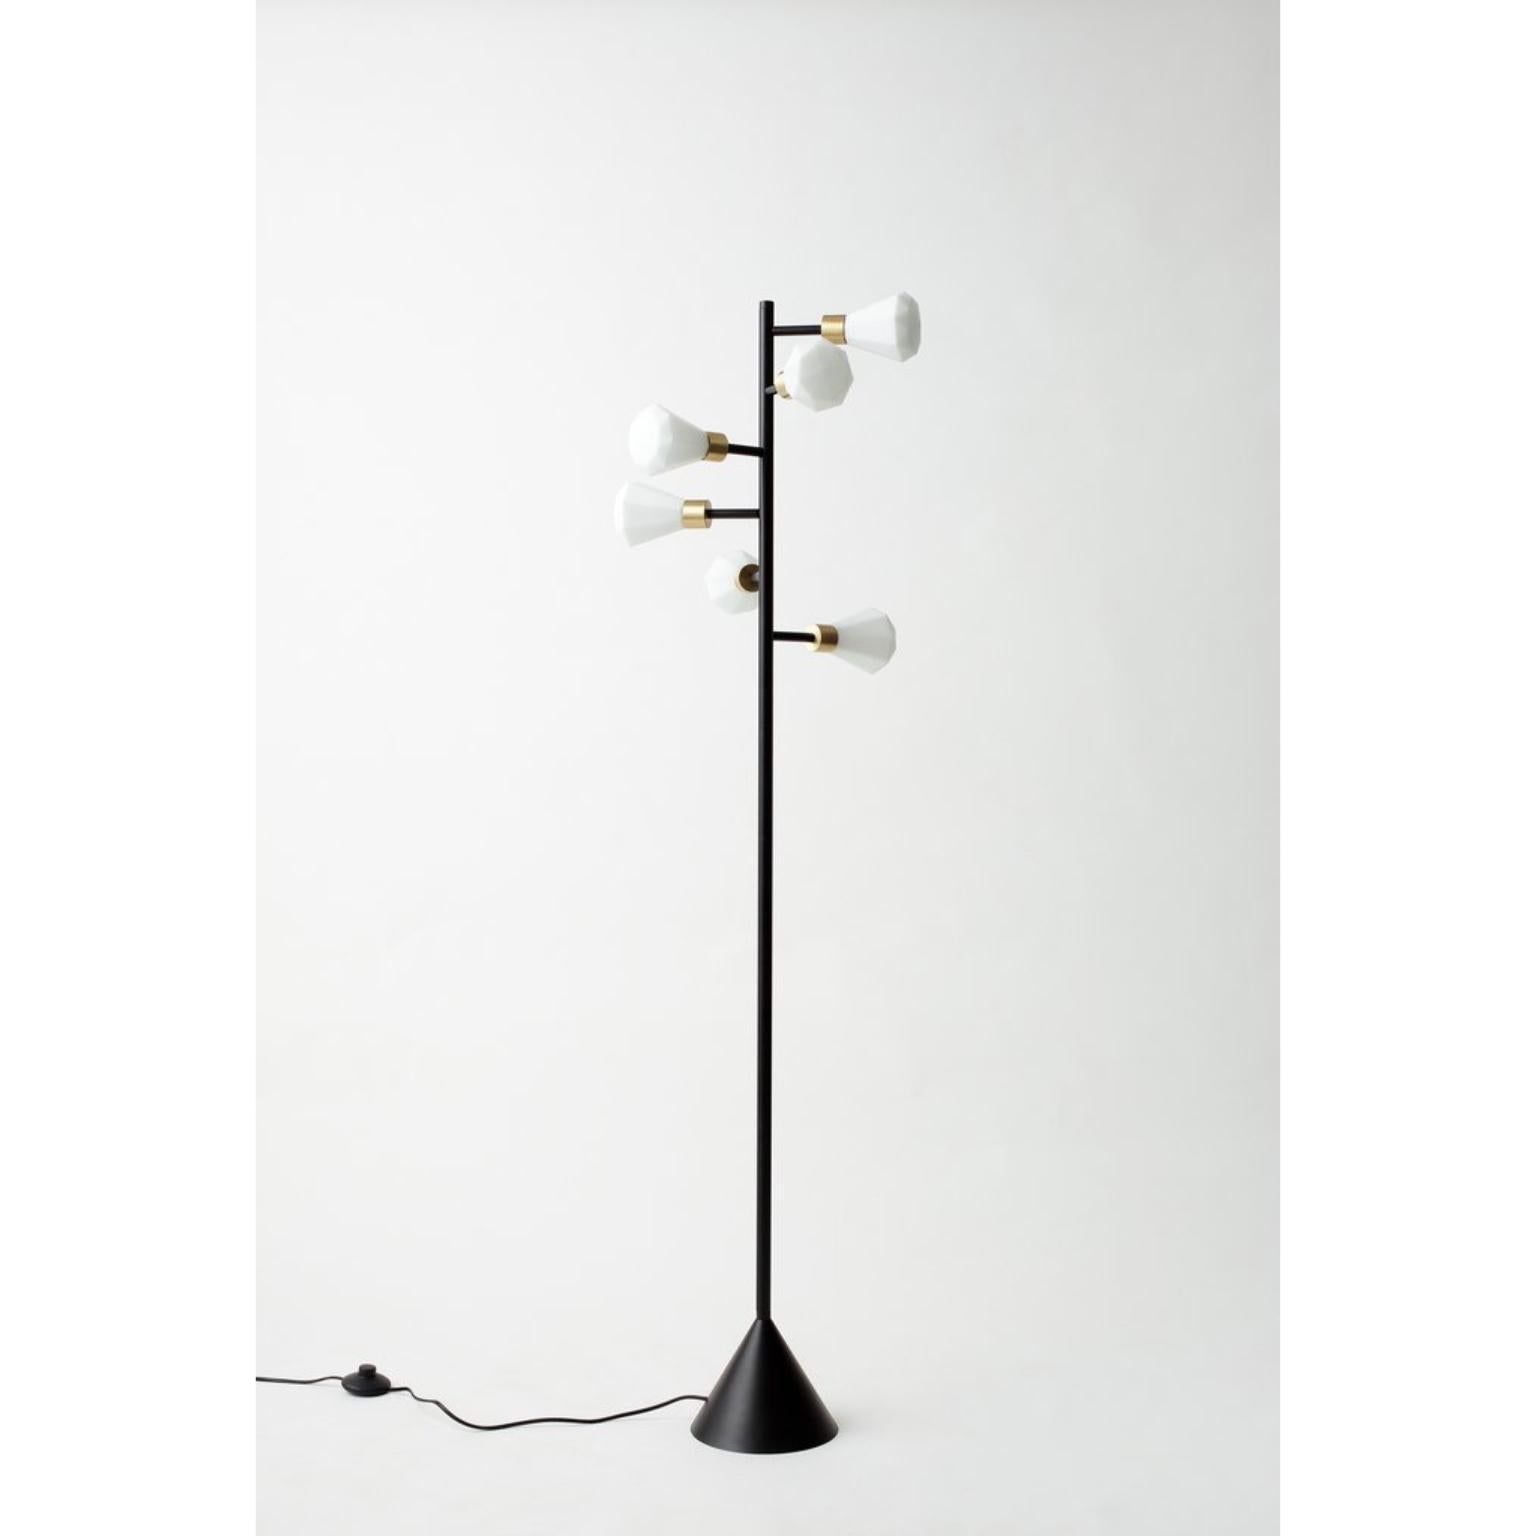 Unique spiral floor lamp by Hatsu.
Dimensions: W 36 x H 149 cm. 
Materials: opal glass with powdercoated aluminium, brass details.

Hatsu is a design studio based in Mumbai that creates modern lighting that are unique and immediately